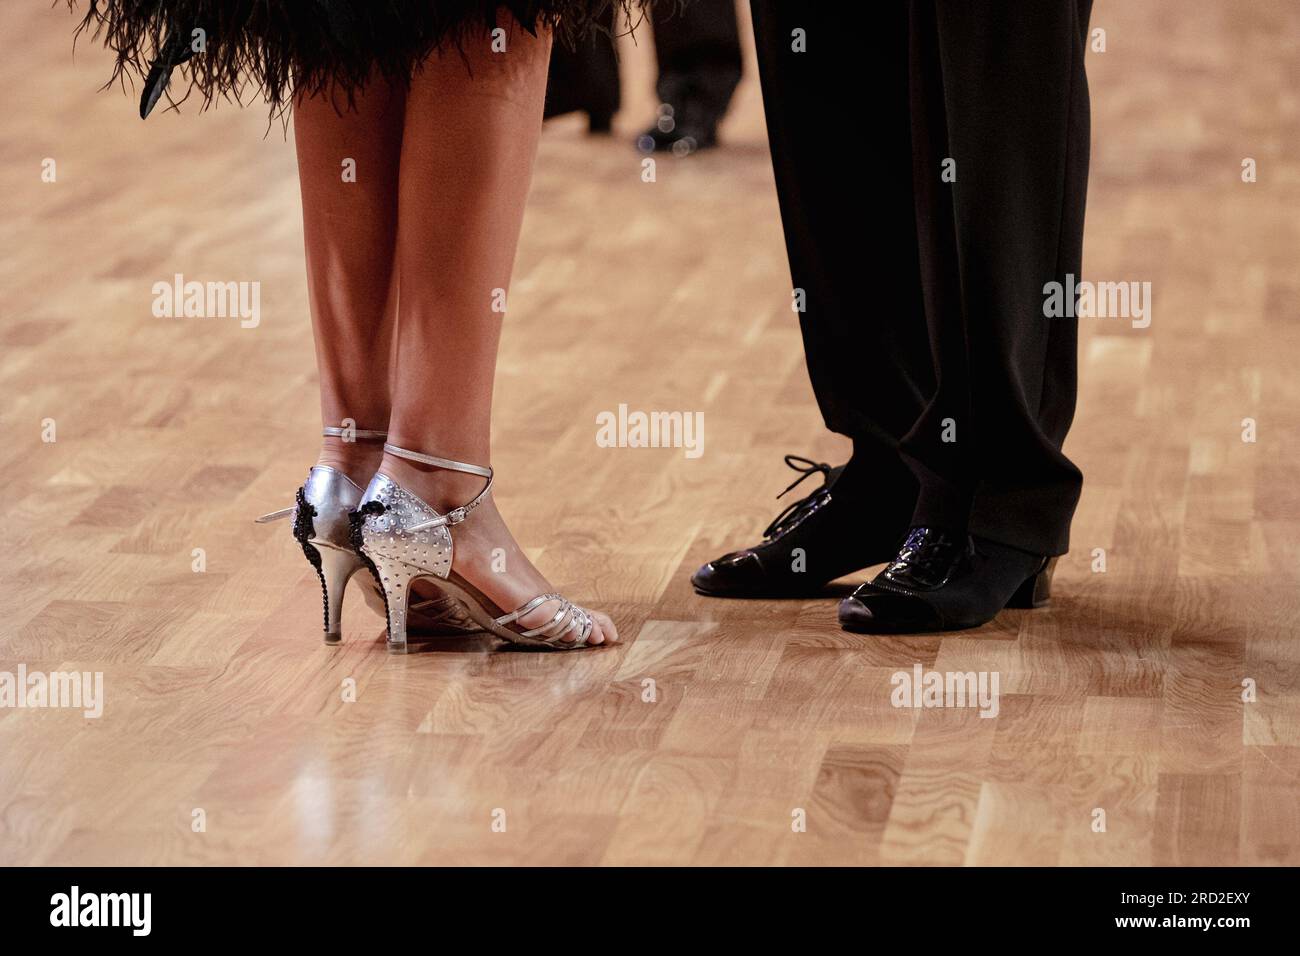 couple dancers, legs woman in silver shoes and man in black dance shoes Stock Photo